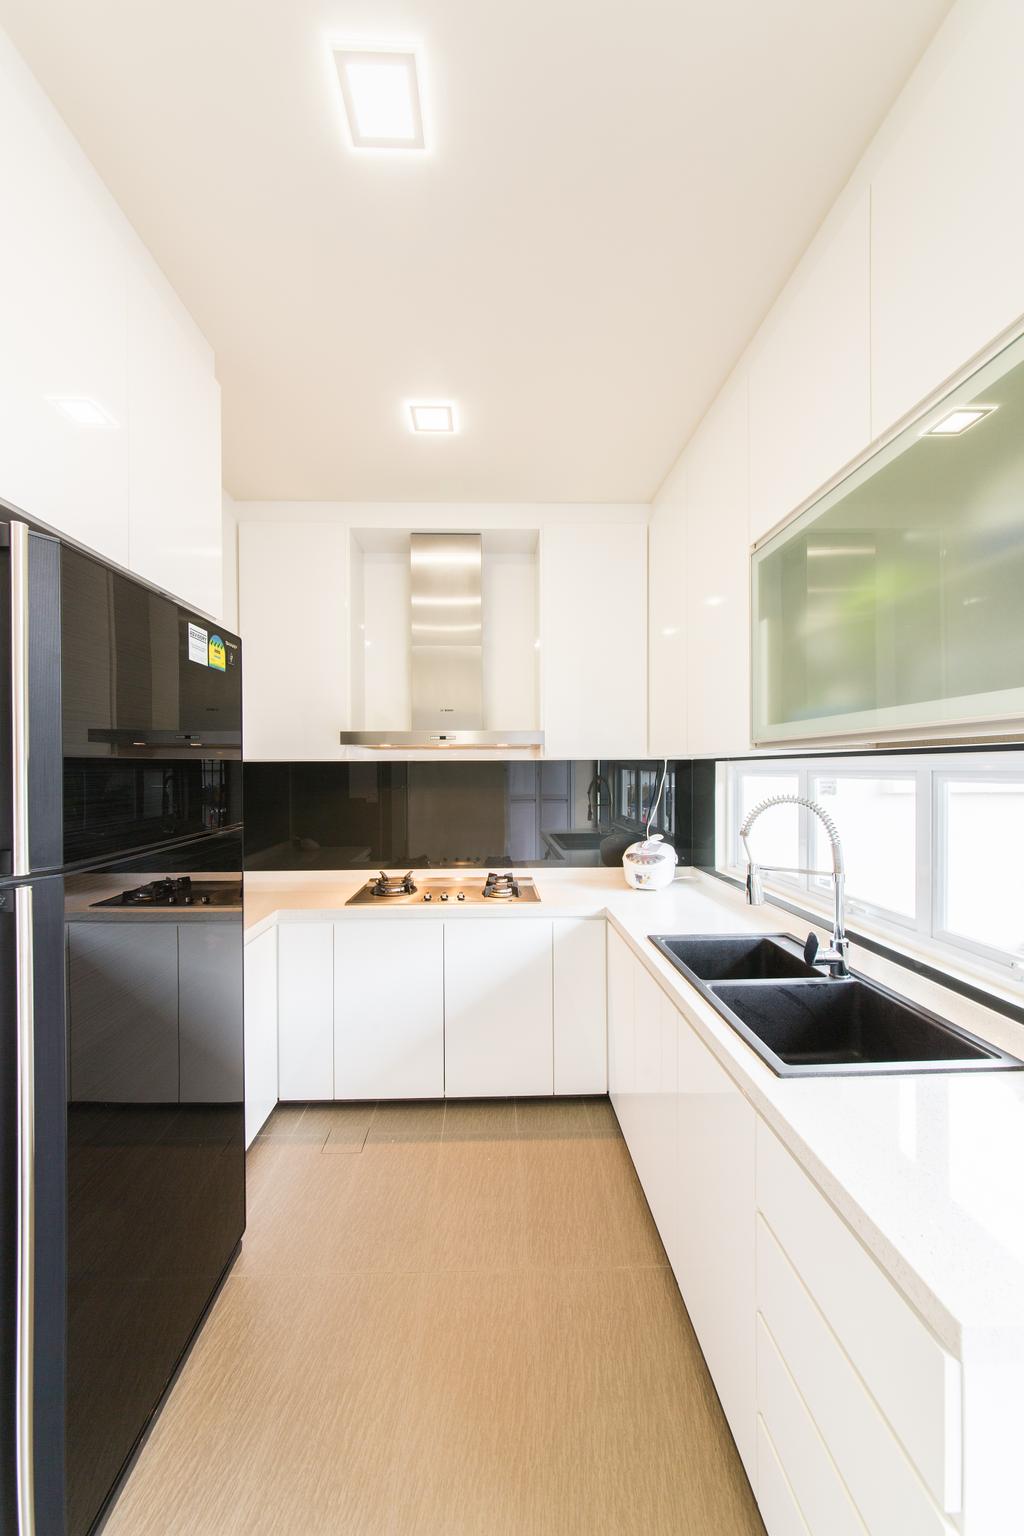 Contemporary, Landed, Kitchen, 25A Parry Avenue, Interior Designer, Corazon Interior, Recessed Lighting, Recessed Lights, Wooden Flooring, Light Wood, Laminated Floor, White Cabinets, Cooker Hood, Cooking Hood, Indoors, Interior Design, Room, Appliance, Electrical Device, Oven, Bathroom